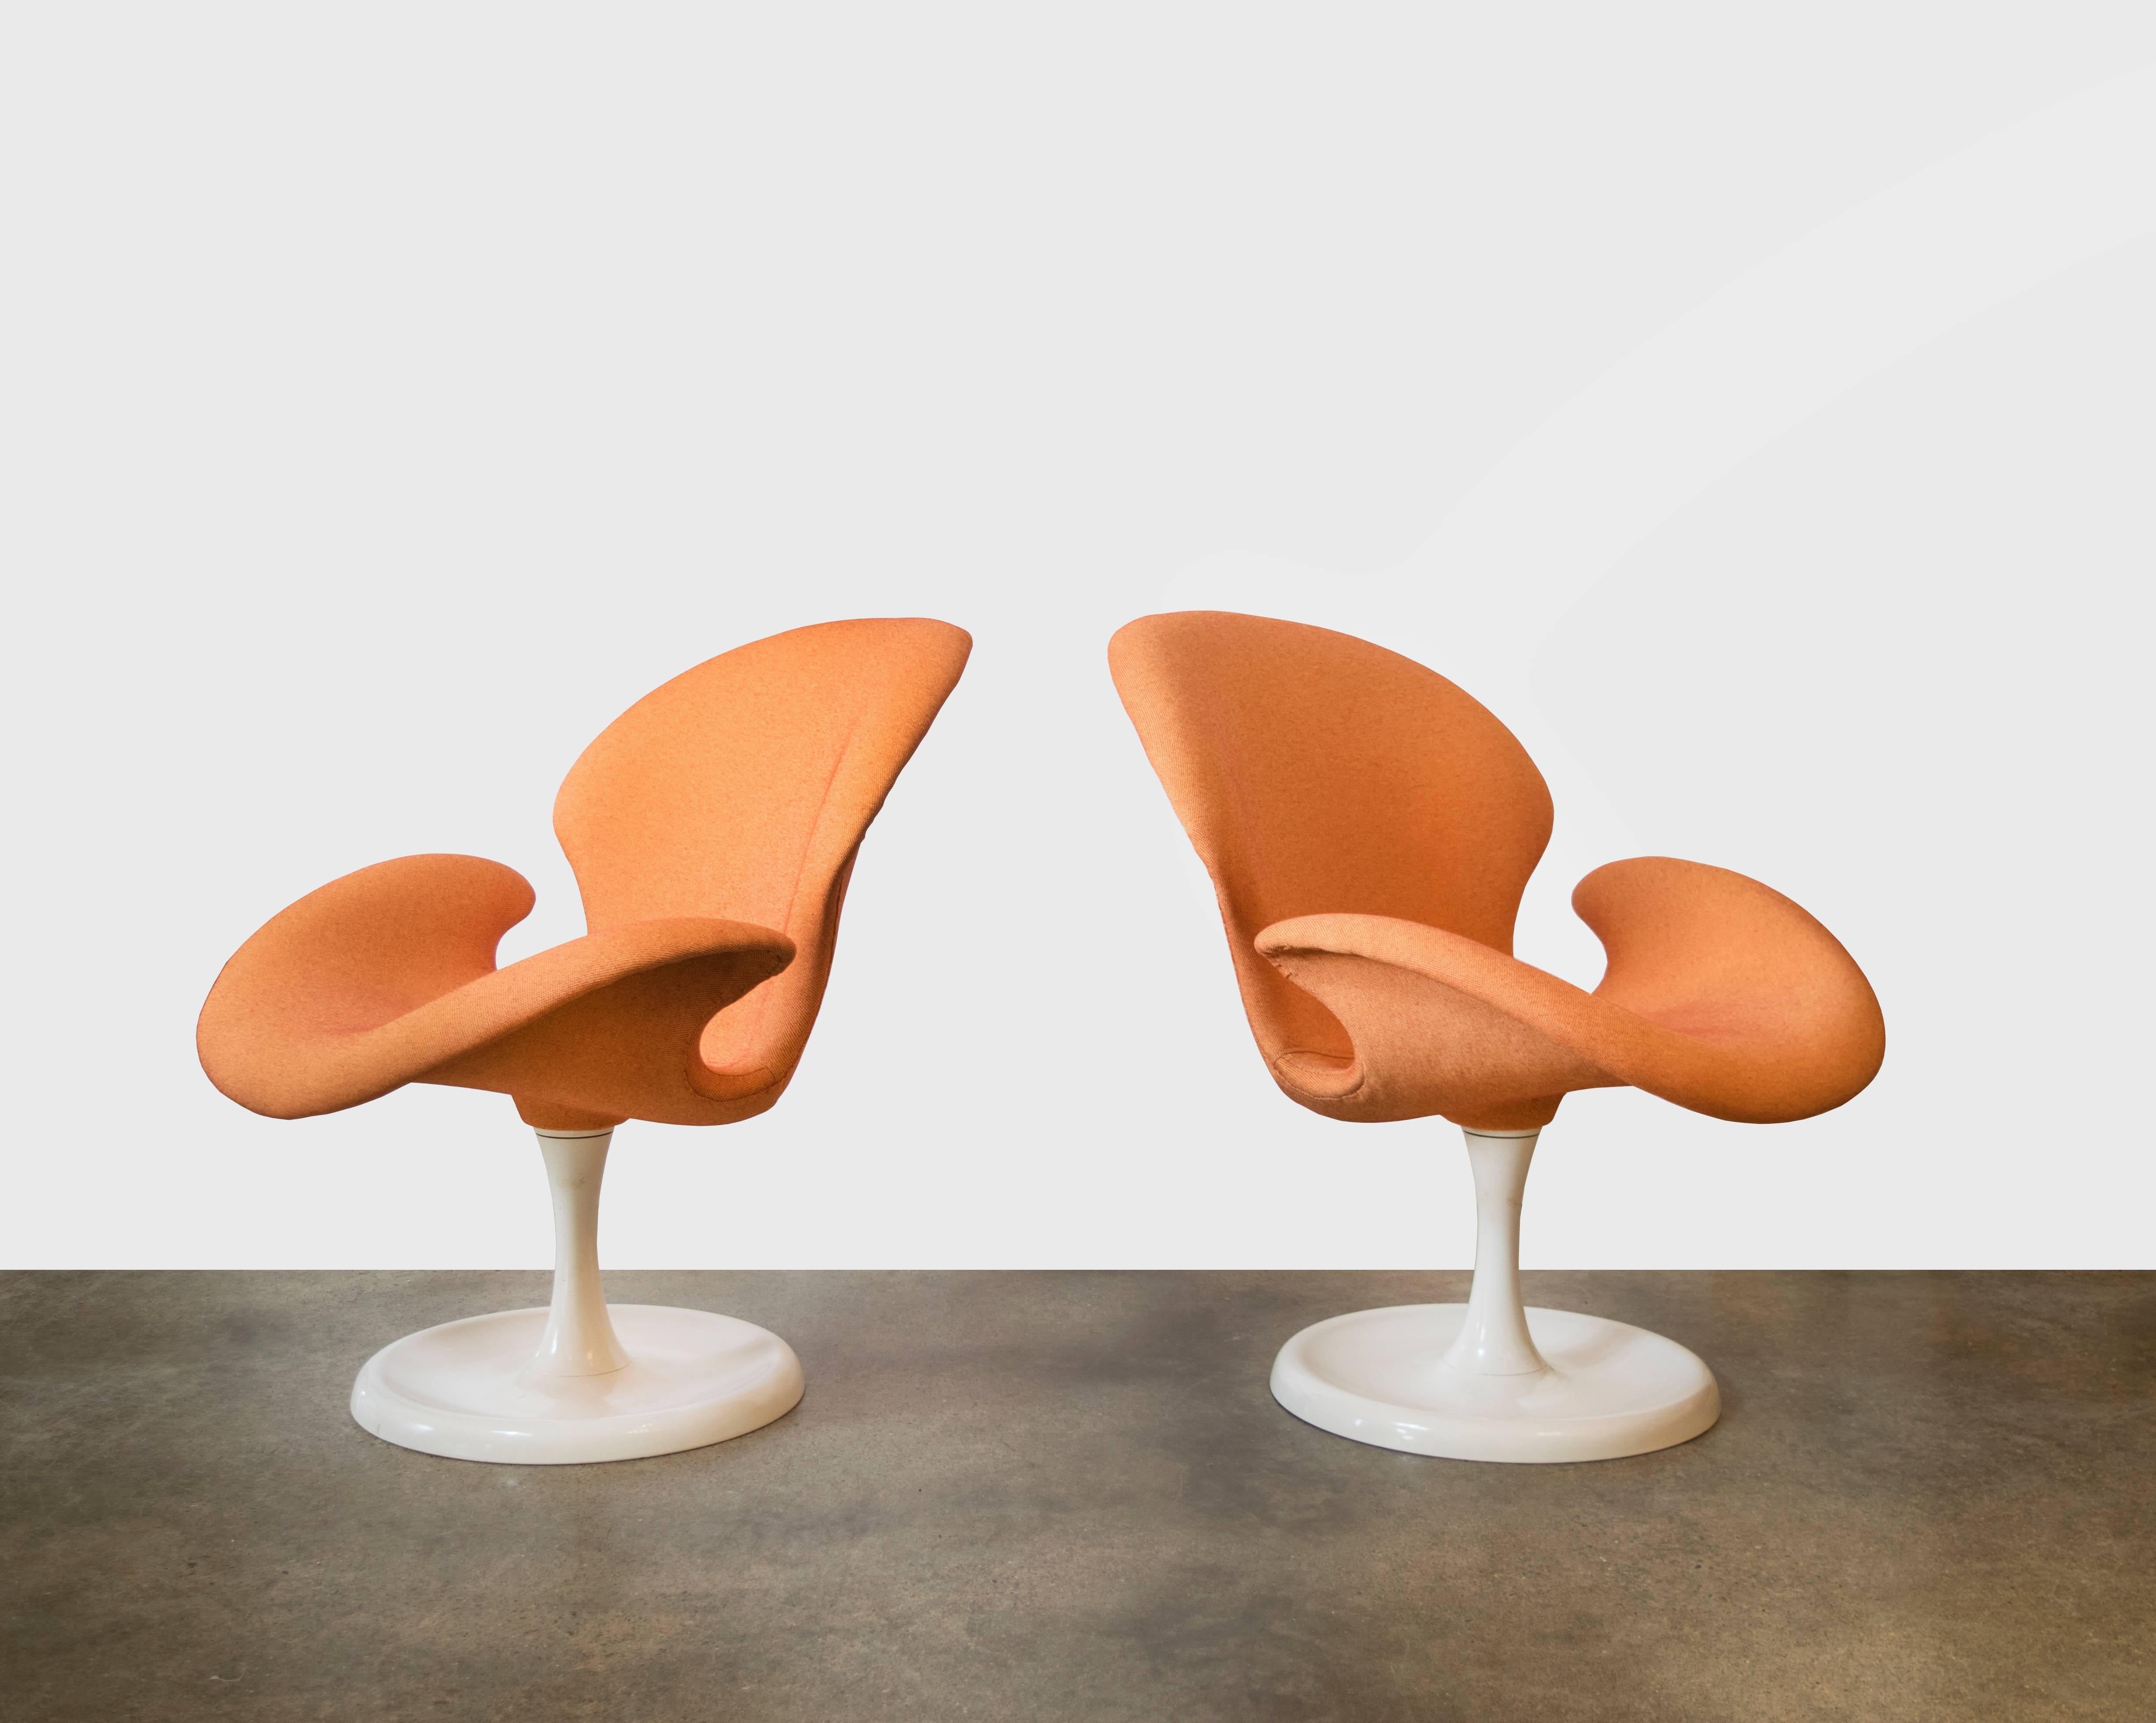 Rare set of four Danish Modern orchid chairs in the style of the Eero Saarinen swan chair but these are larger and more substantial. They also swivel and have been recently restored with new powder coating to the steel bases and new Knoll fabric and